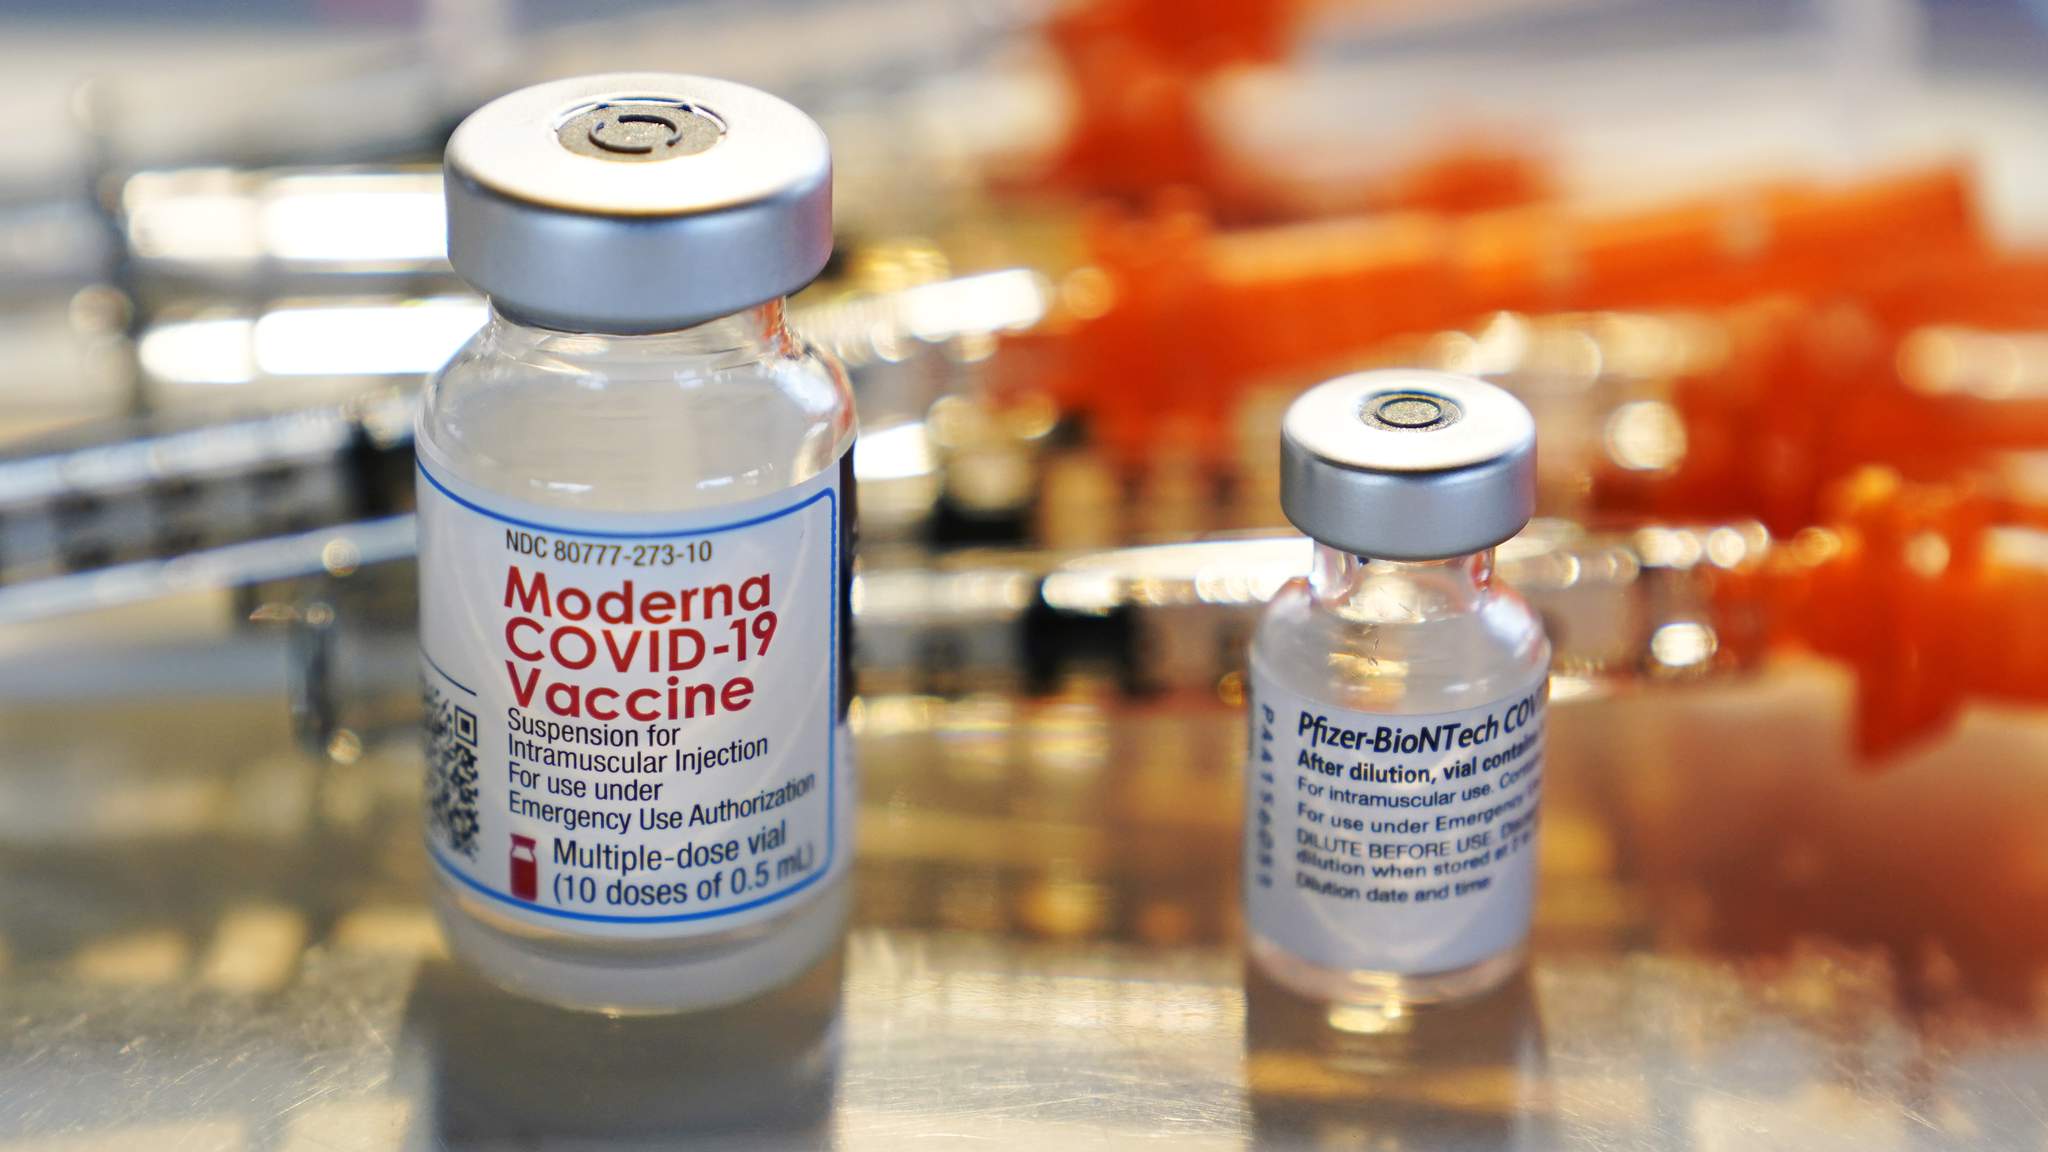 Over 900,000 first doses of the COVID-19 vaccine arriving in Texas this week